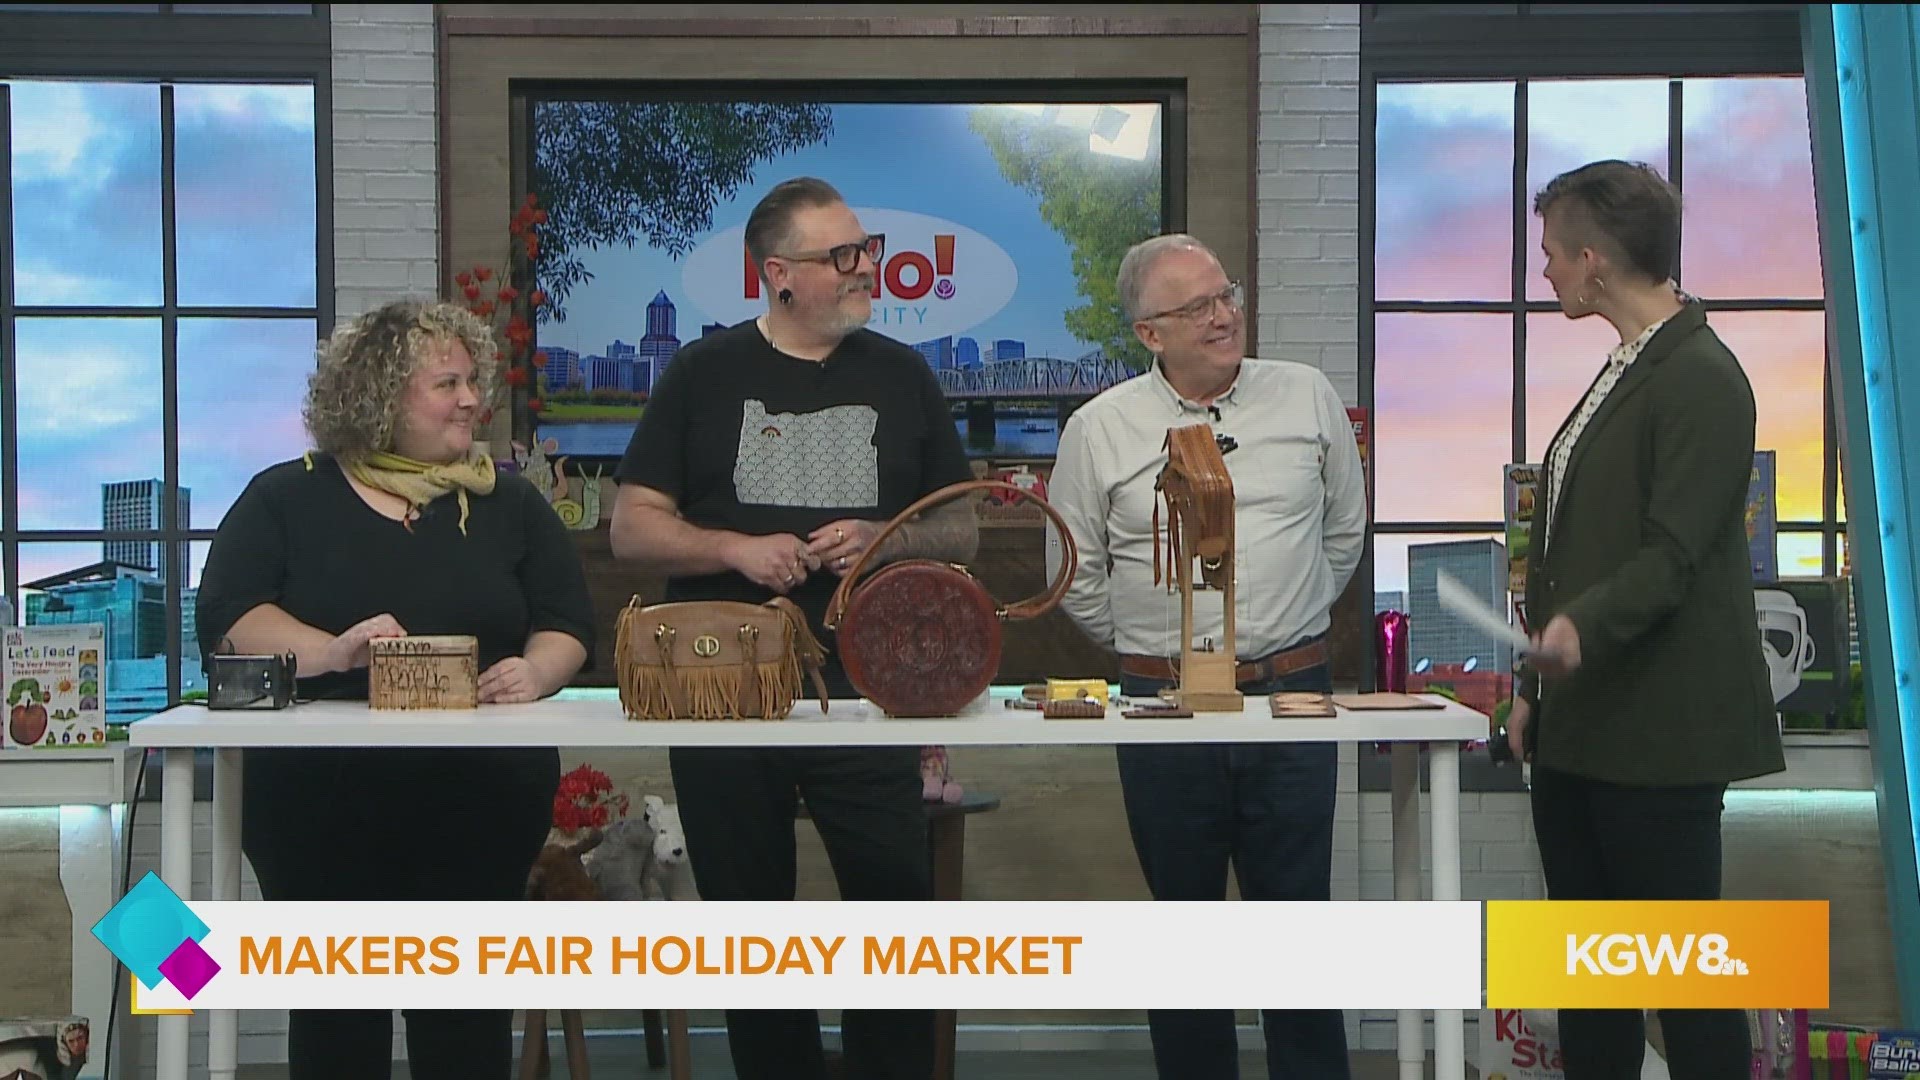 Makers Fair Holiday Market is open every day until December 23